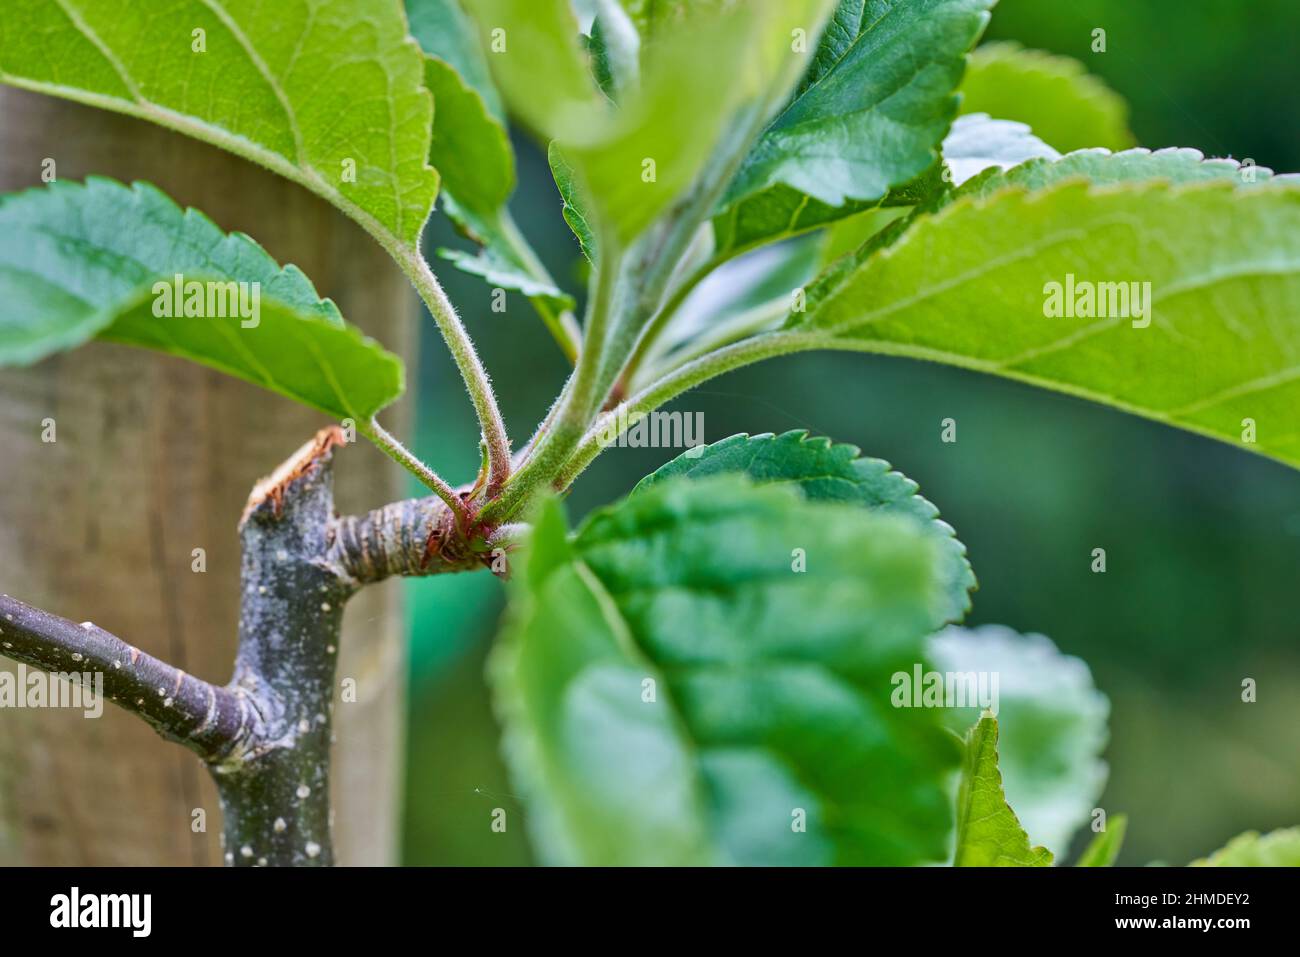 Espalier apple tree stem trained against a wooden pole and pruned to a side shoot fruiting spur. Close-up view of fresh apple tree leaves in Spring. Stock Photo